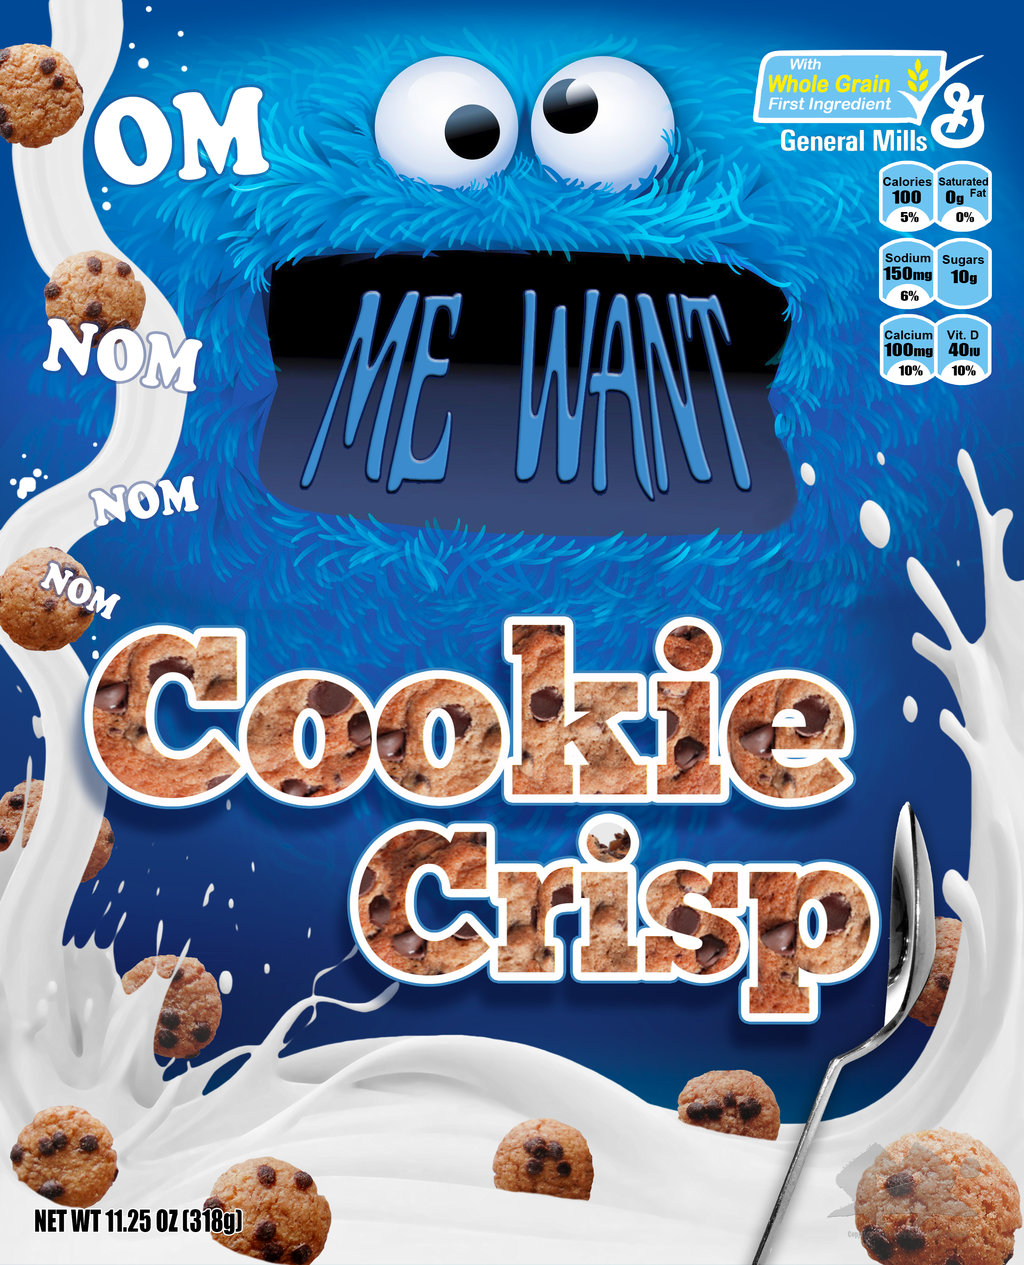  Although edited, the center cookie monster illustration does not belong to me and should be credited to 'rammban' found here:&nbsp; http://pichost.me/1711004/  